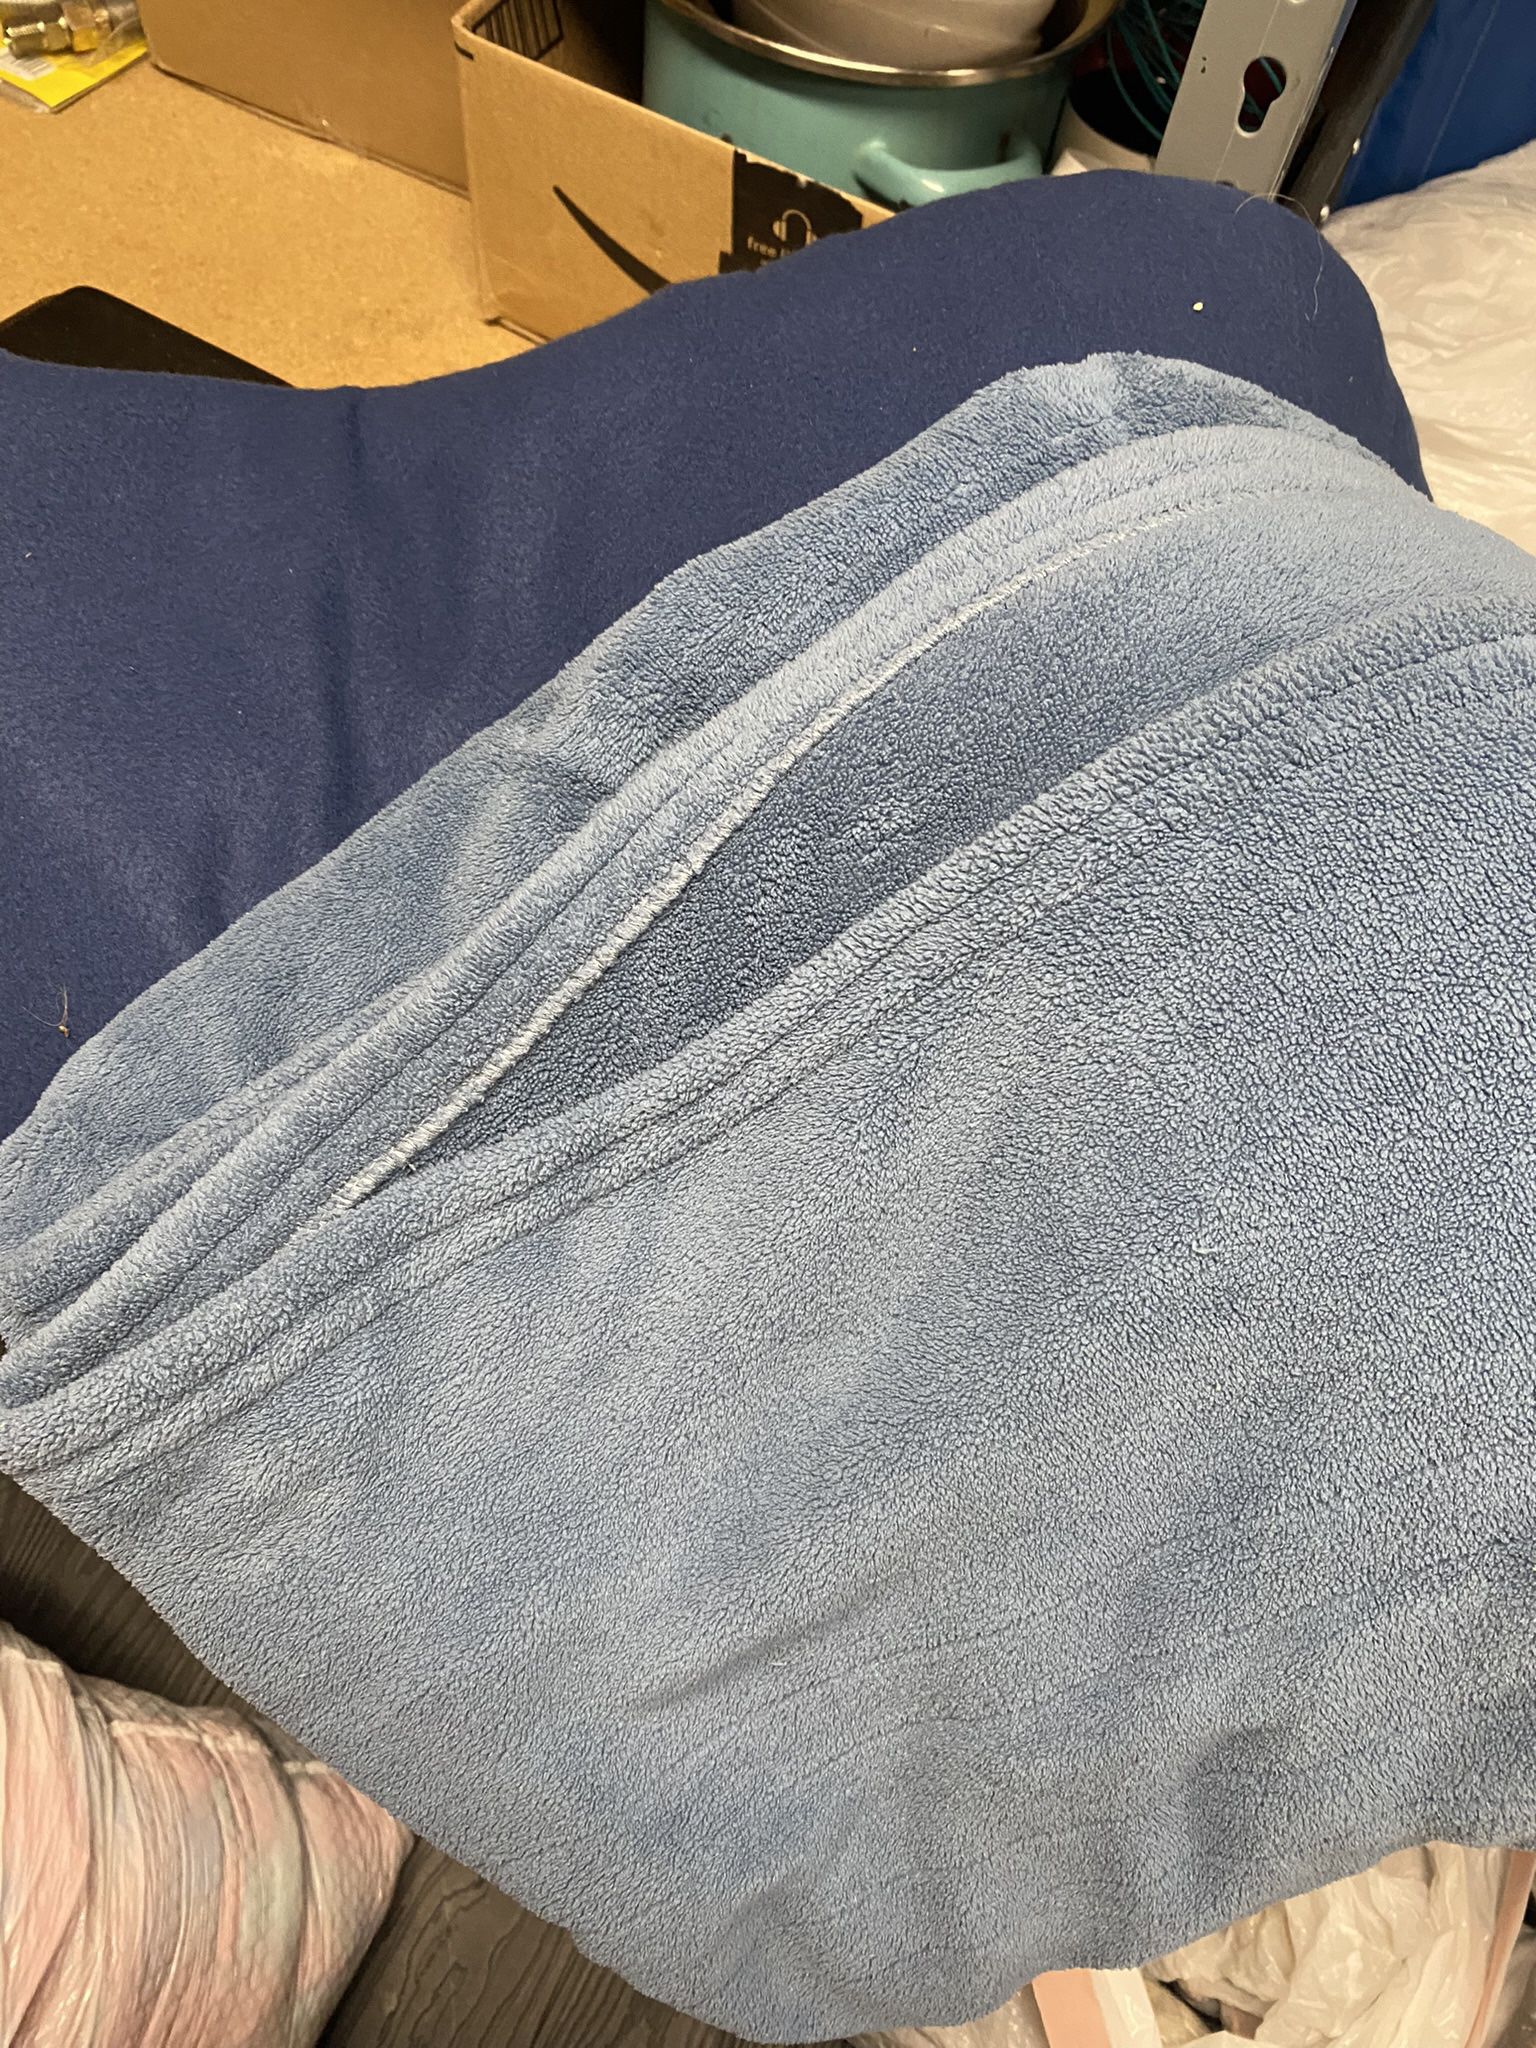 2 Electric Blankets Missing Cords 